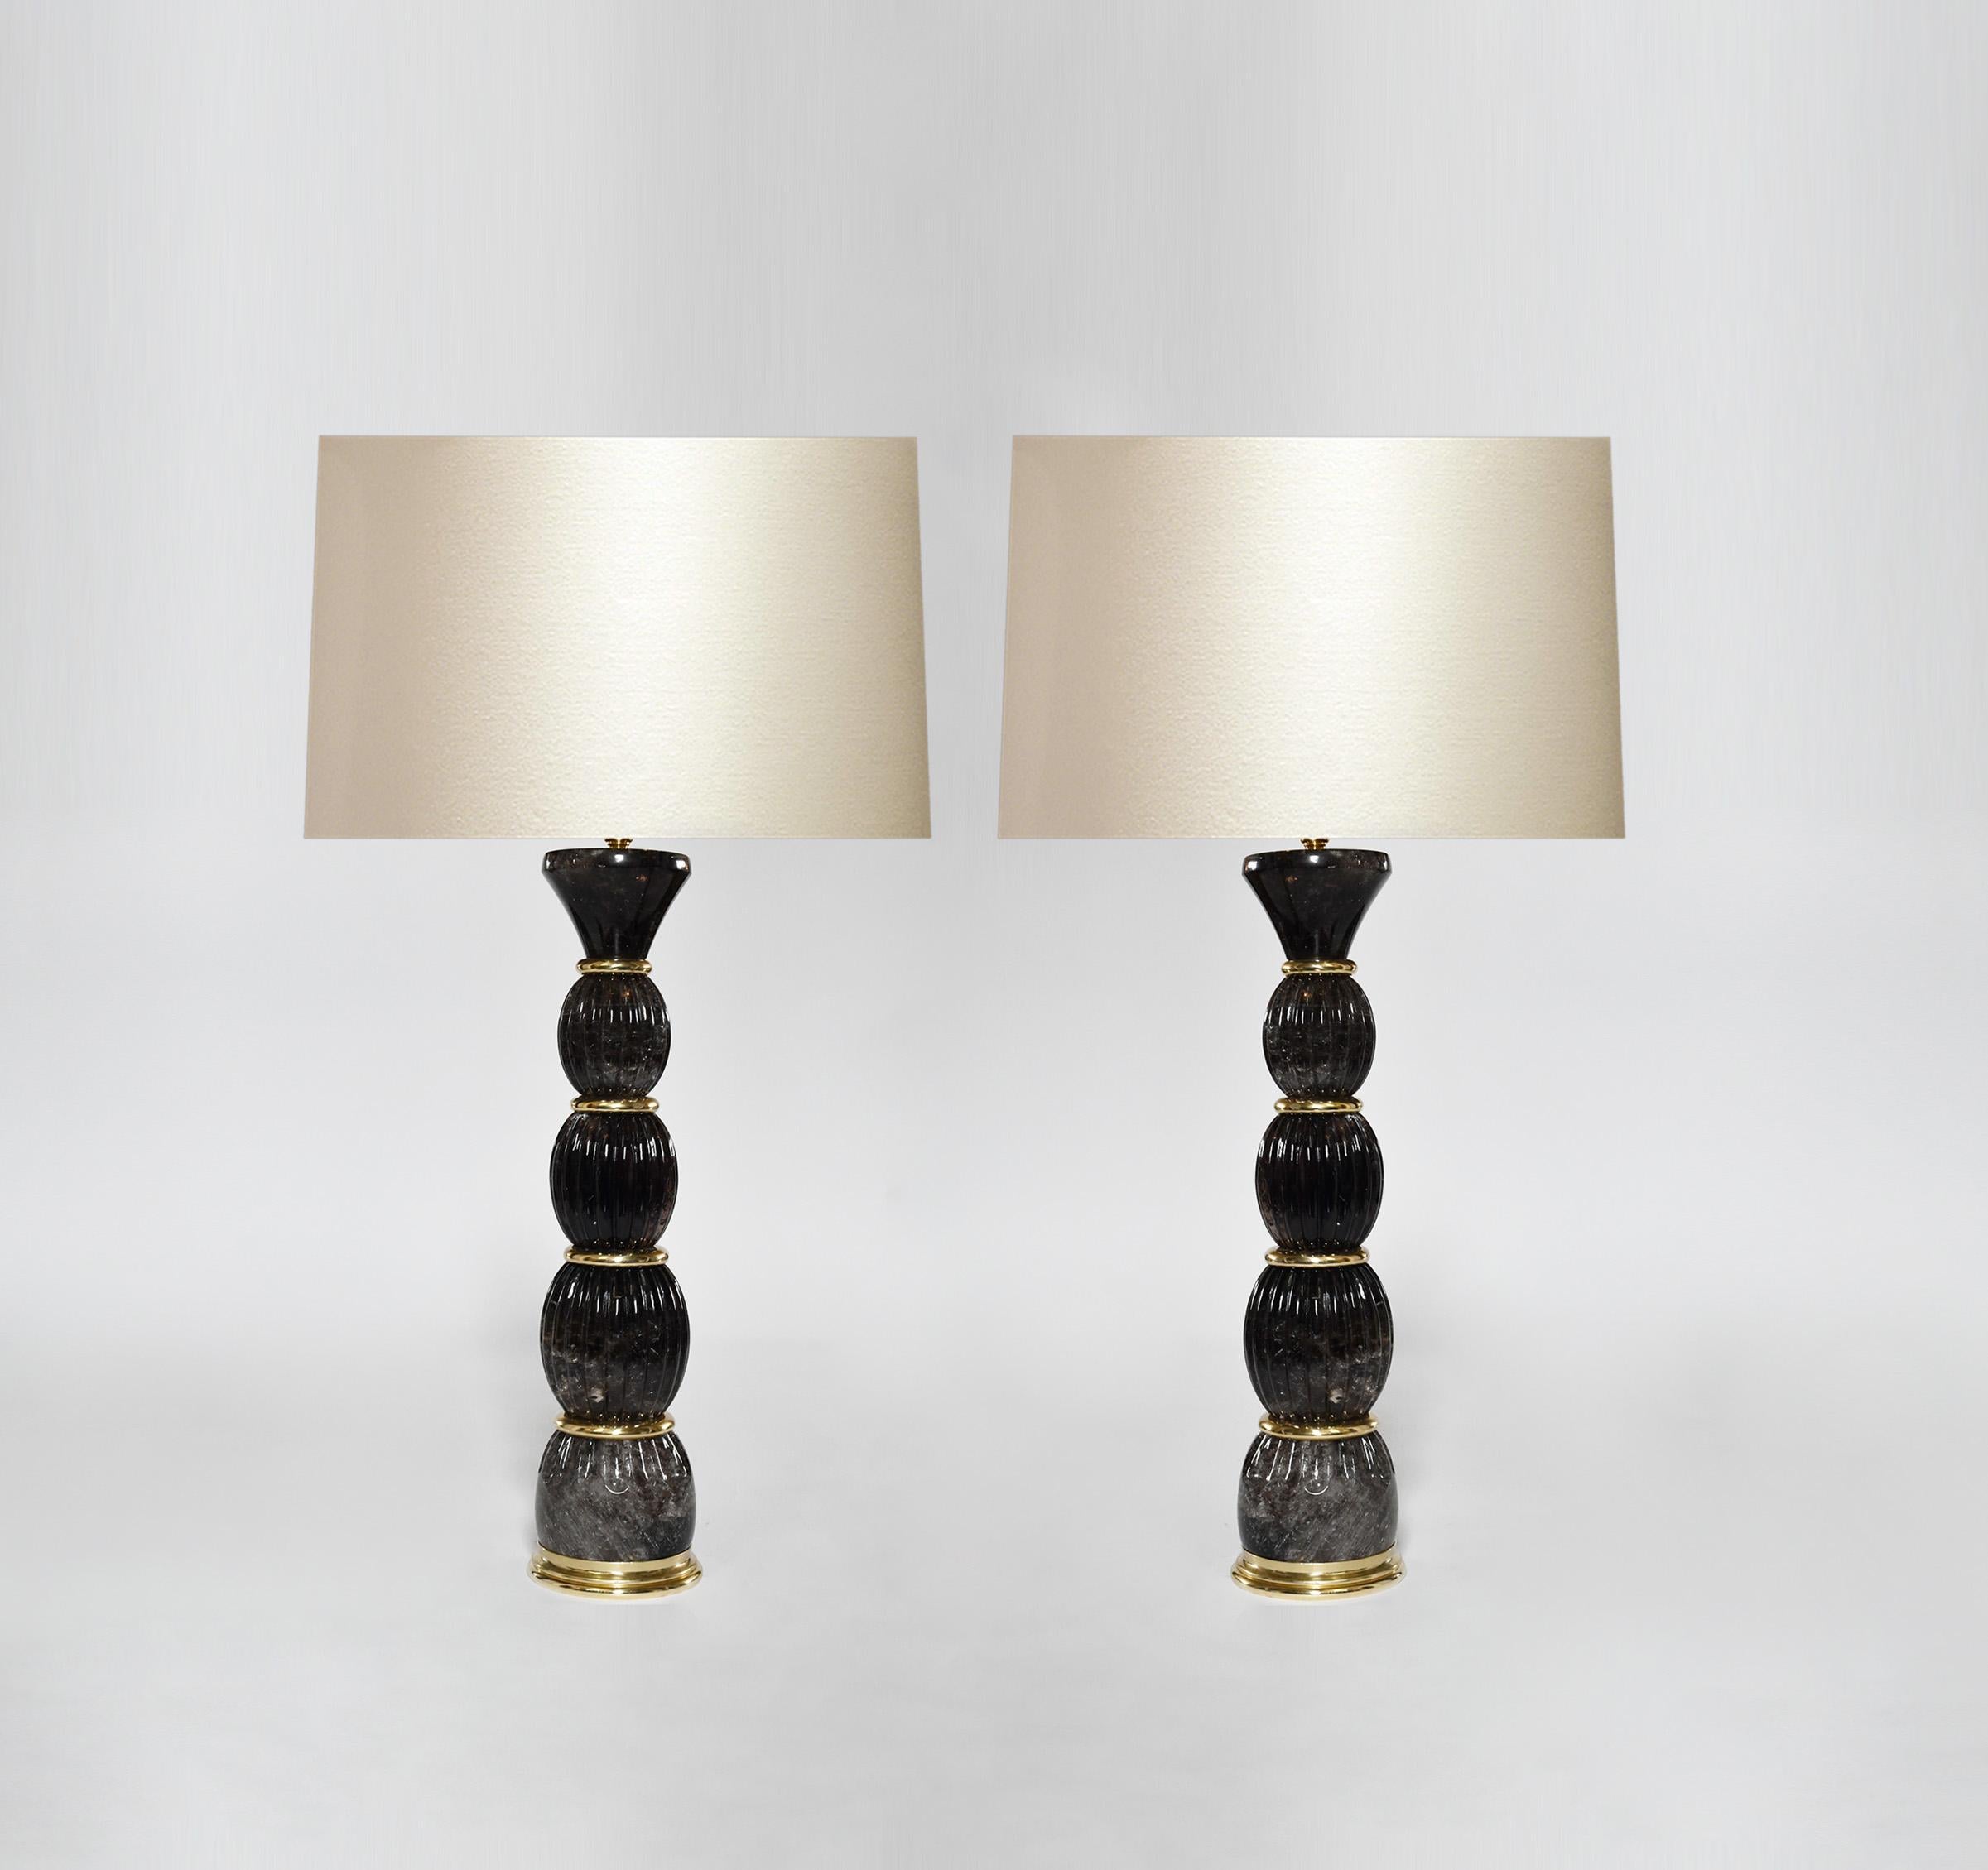 Pair of smoky rock crystal lamps with polish brass insert decoration. Created by Pheonix Gallery, NYC.
To the top of the rock crystal is 17 in.
(Lampshade not included).
Custom size and metal finish upon request.